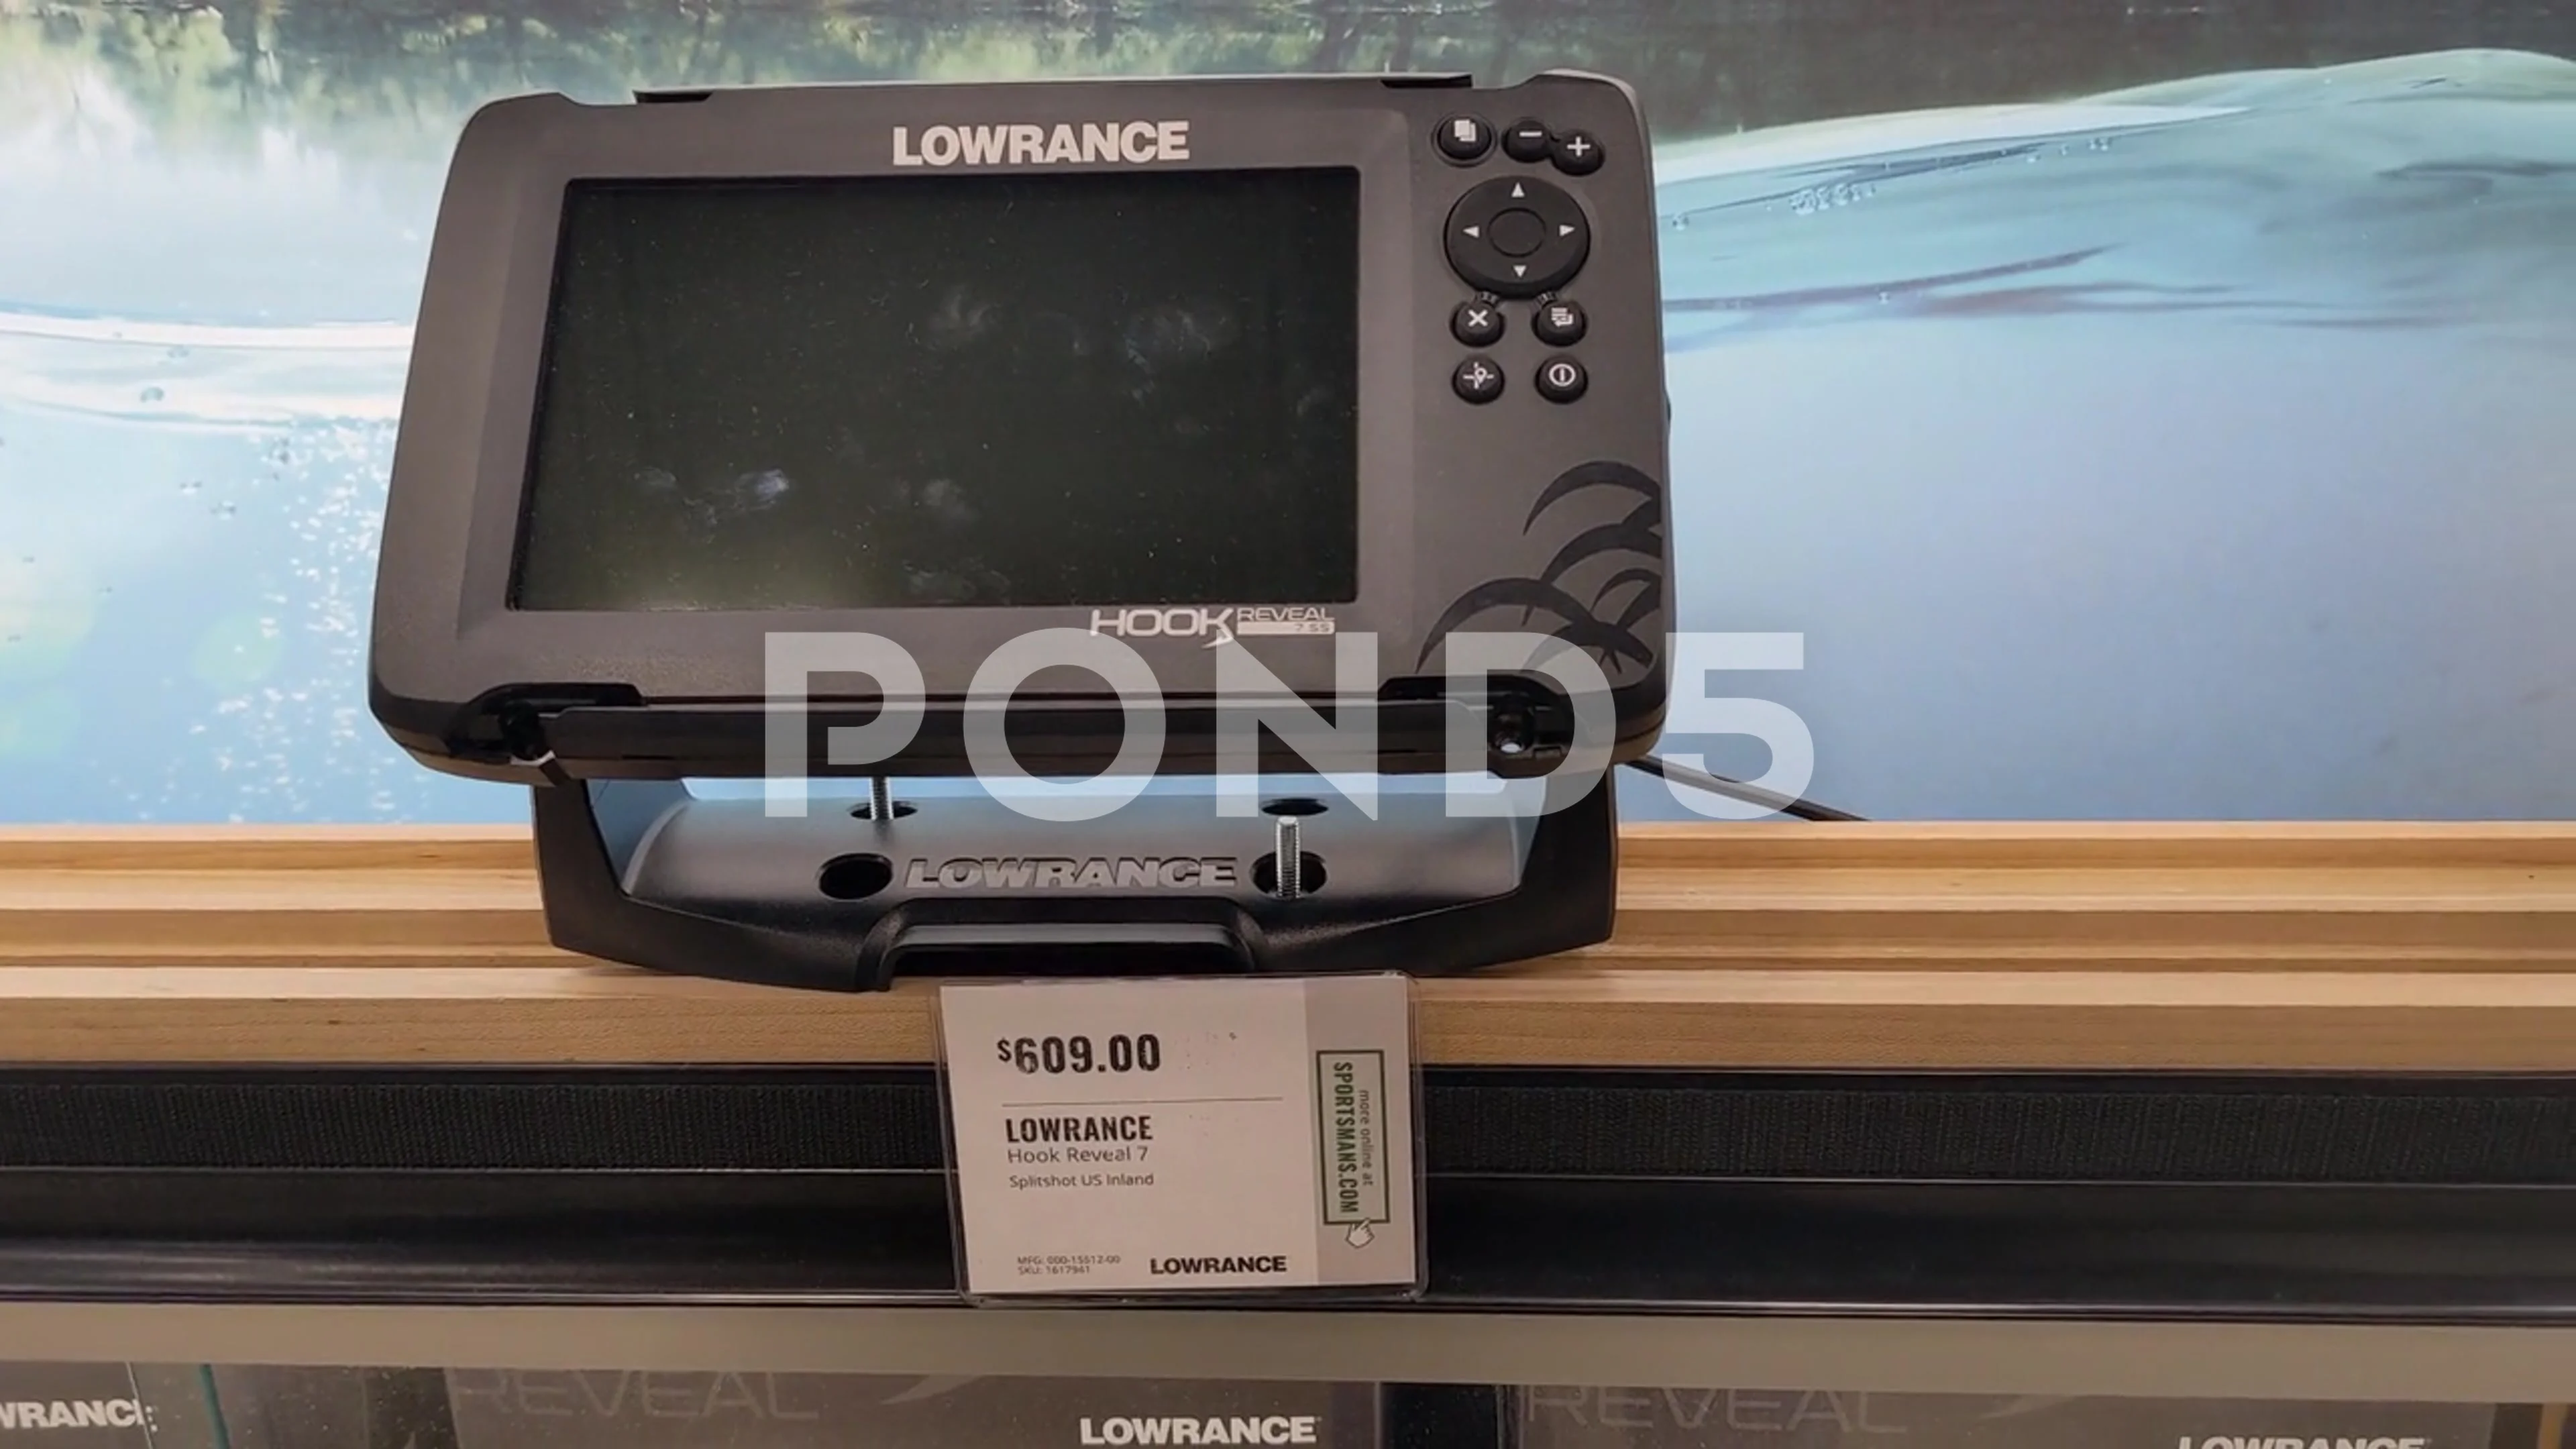 Lowrance Boat Monitor, Stock Video